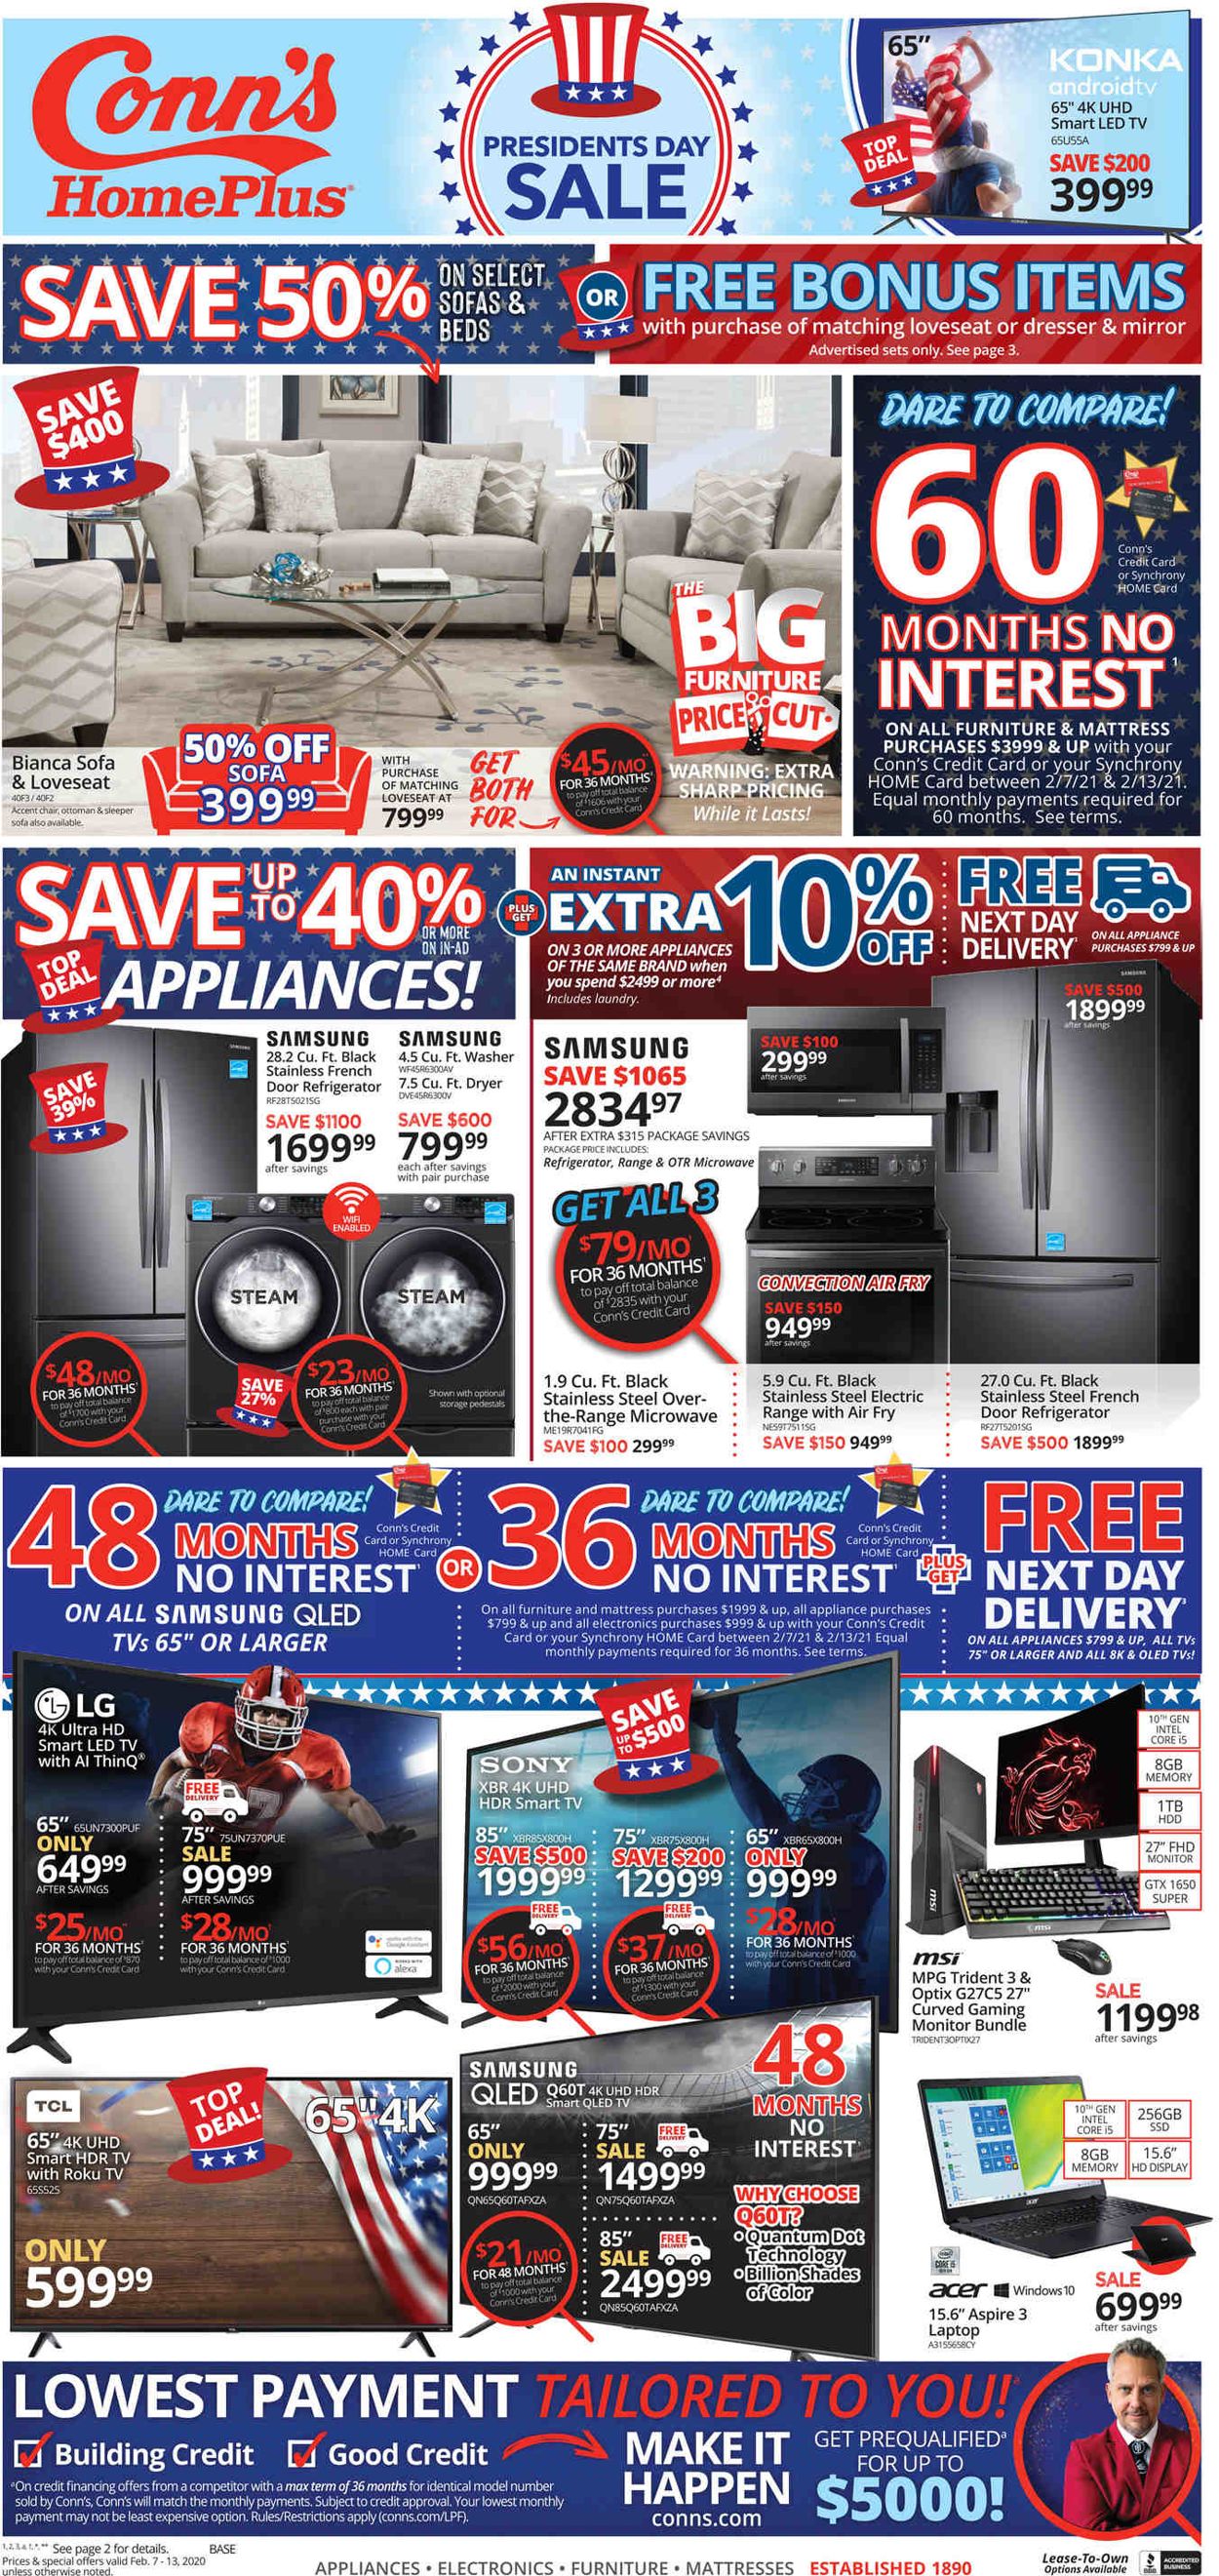 Conn's Home Plus Weekly Ad Circular - valid 02/07-02/13/2021